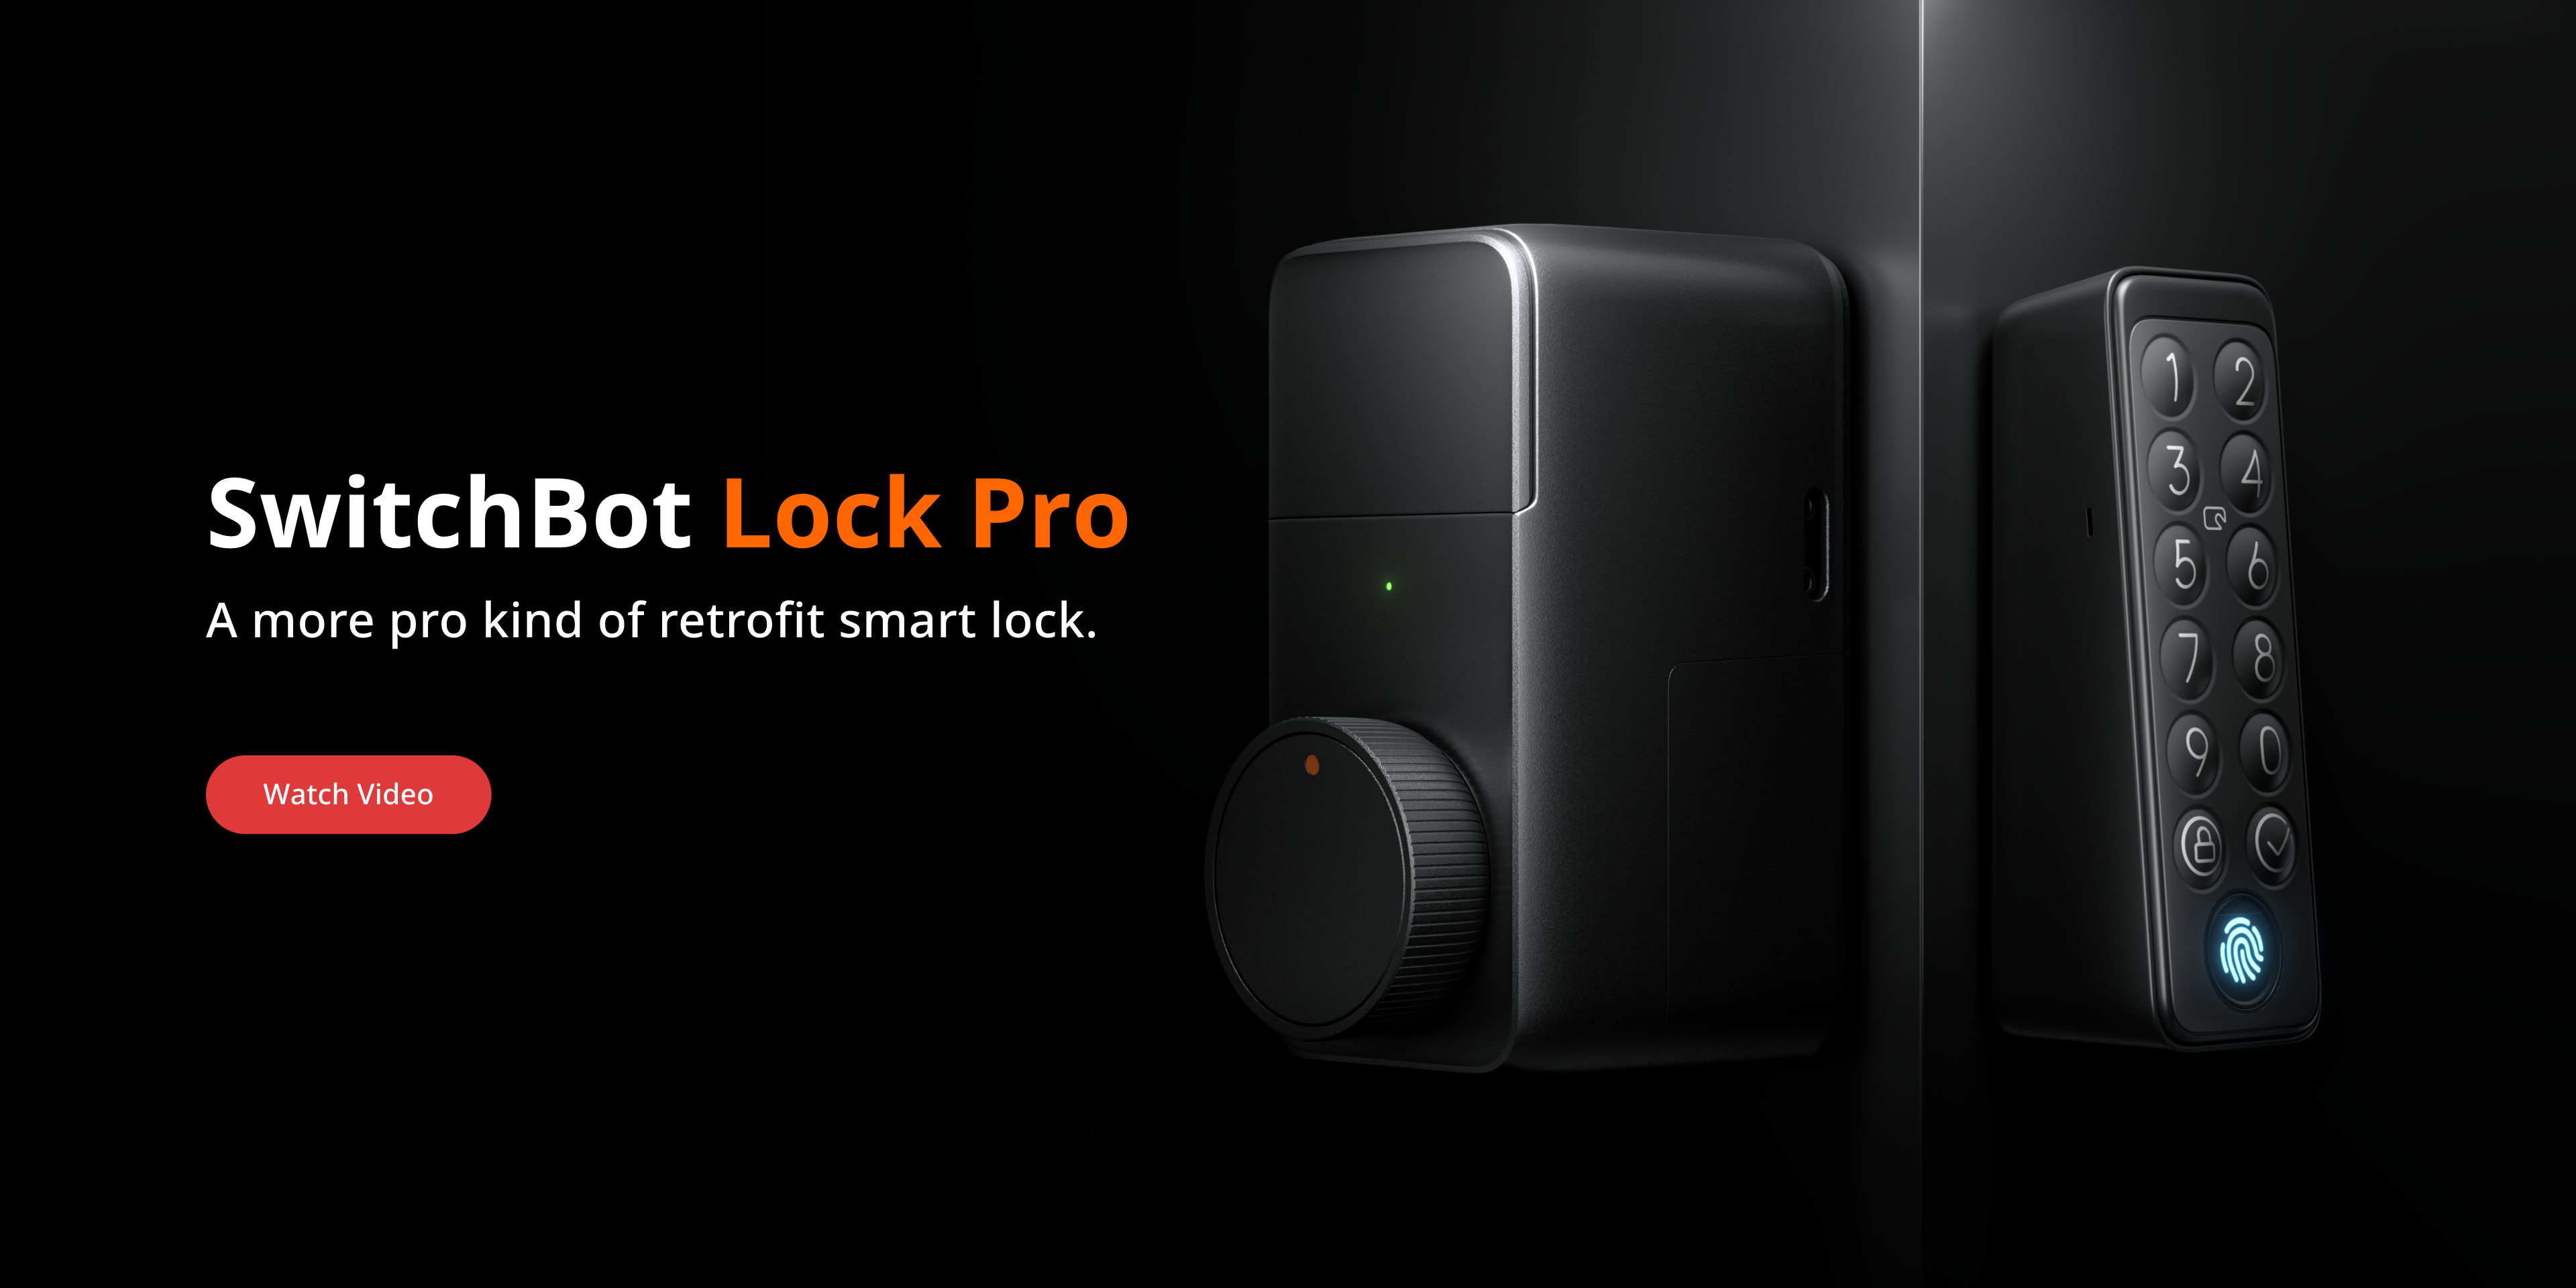 switchbot lock pro (3).png__PID:4101aefb-f256-4735-bbae-a8398f6e68be